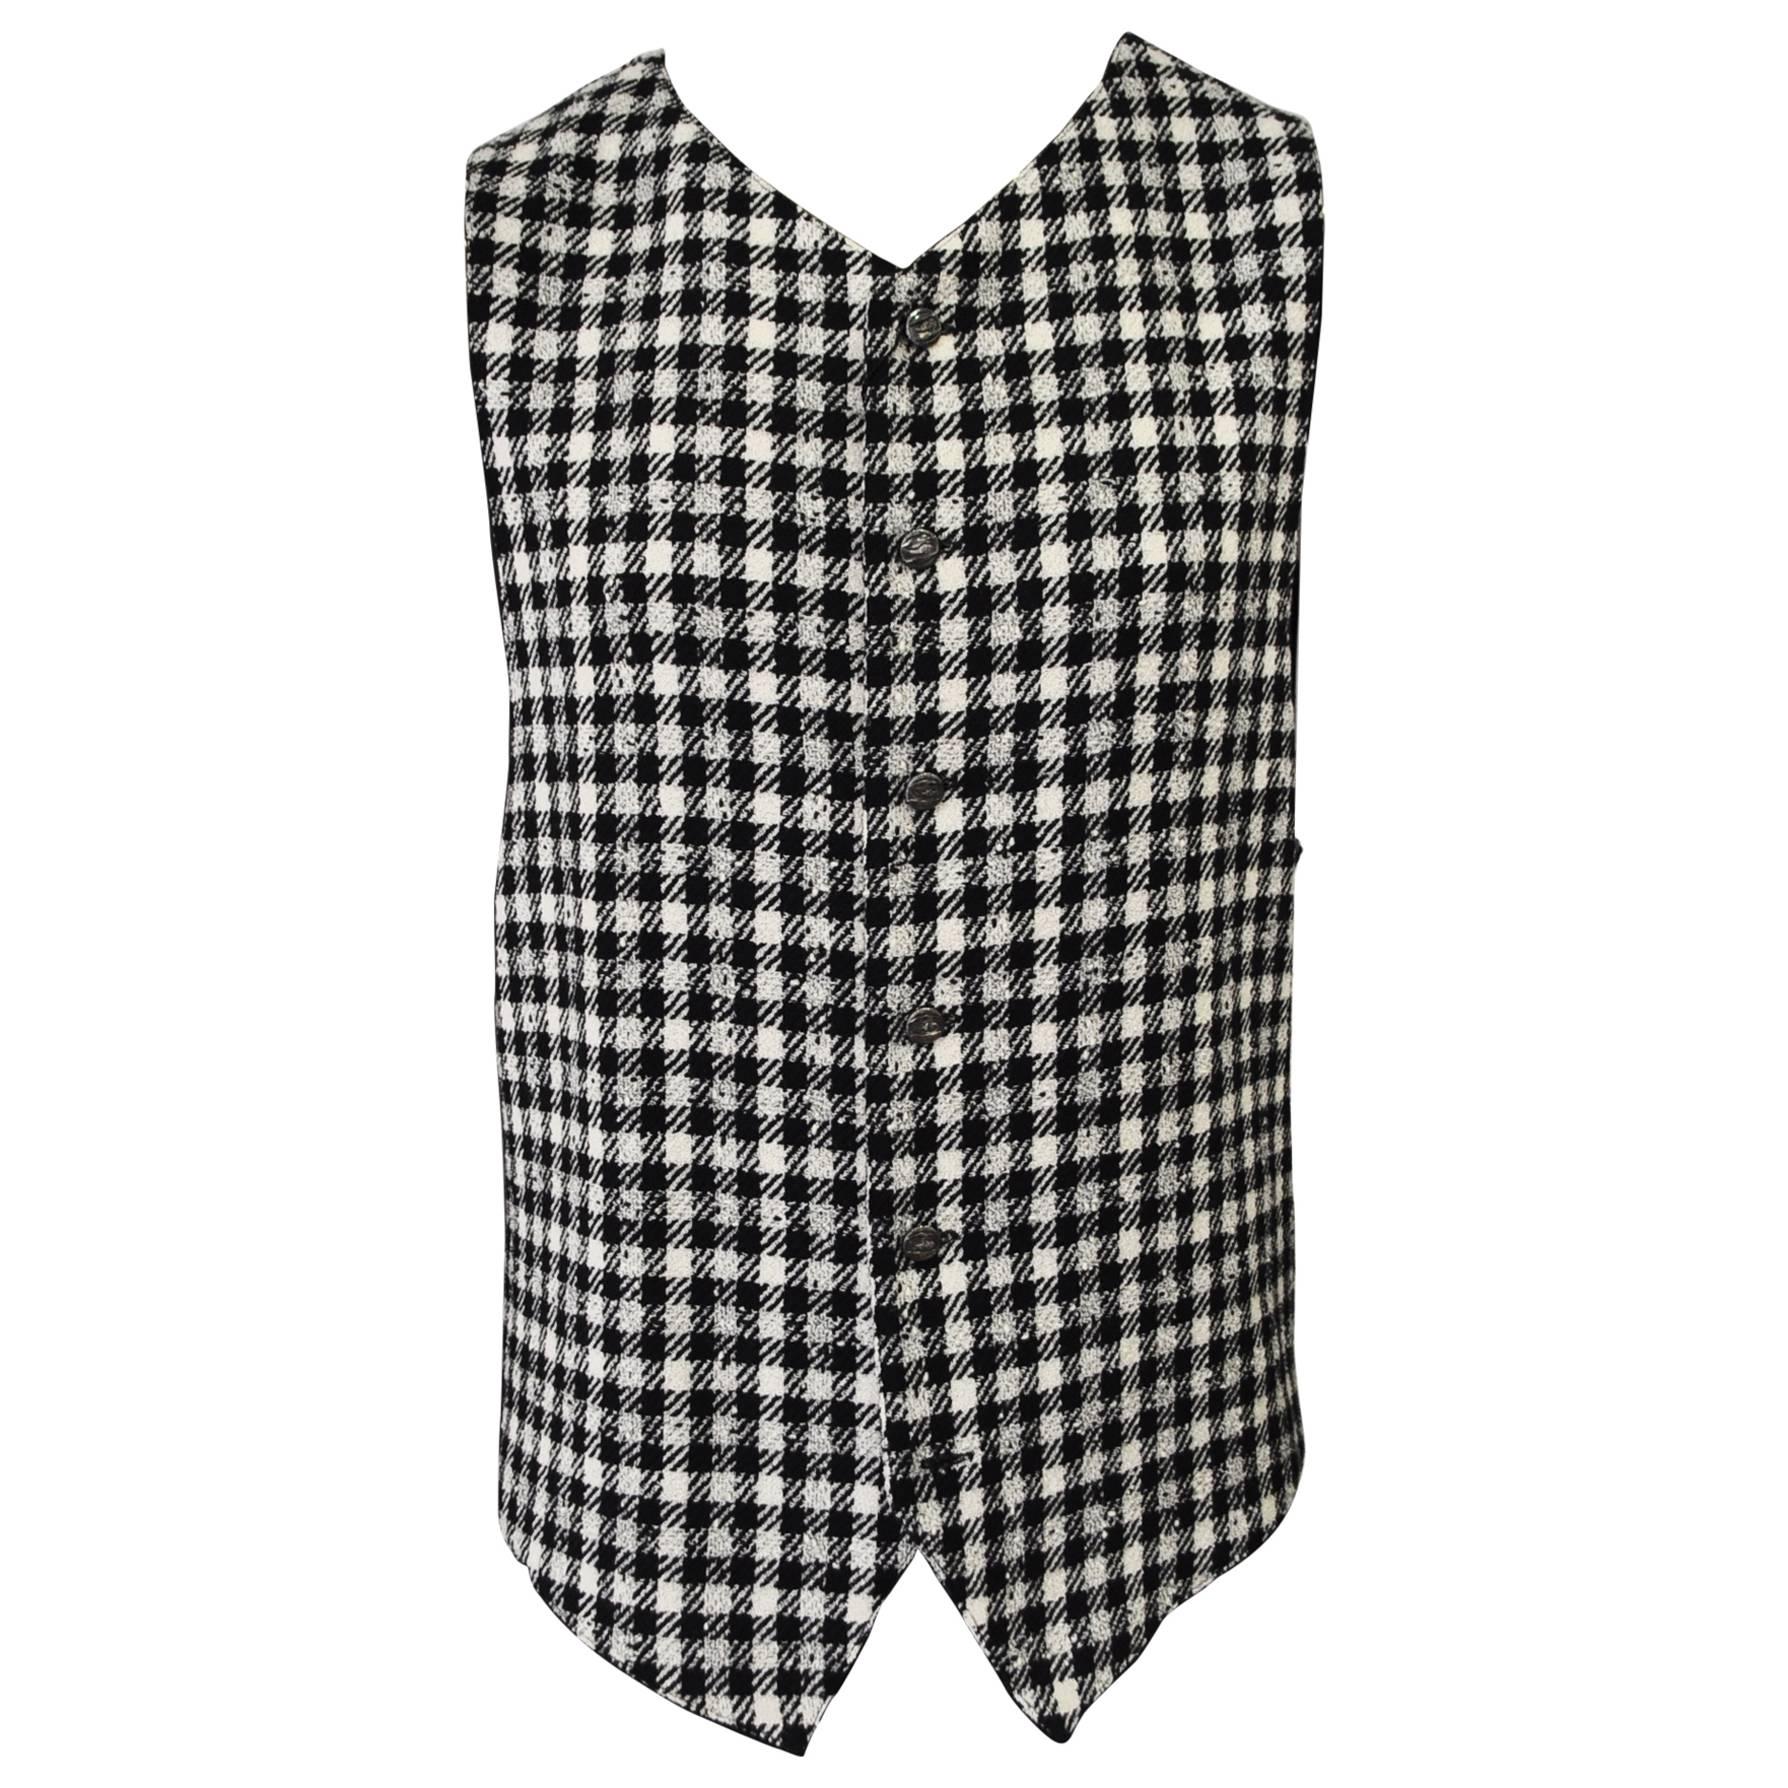 Rare Istante by Gianni Versace Checked Waistcoat Fall 1994 For Sale